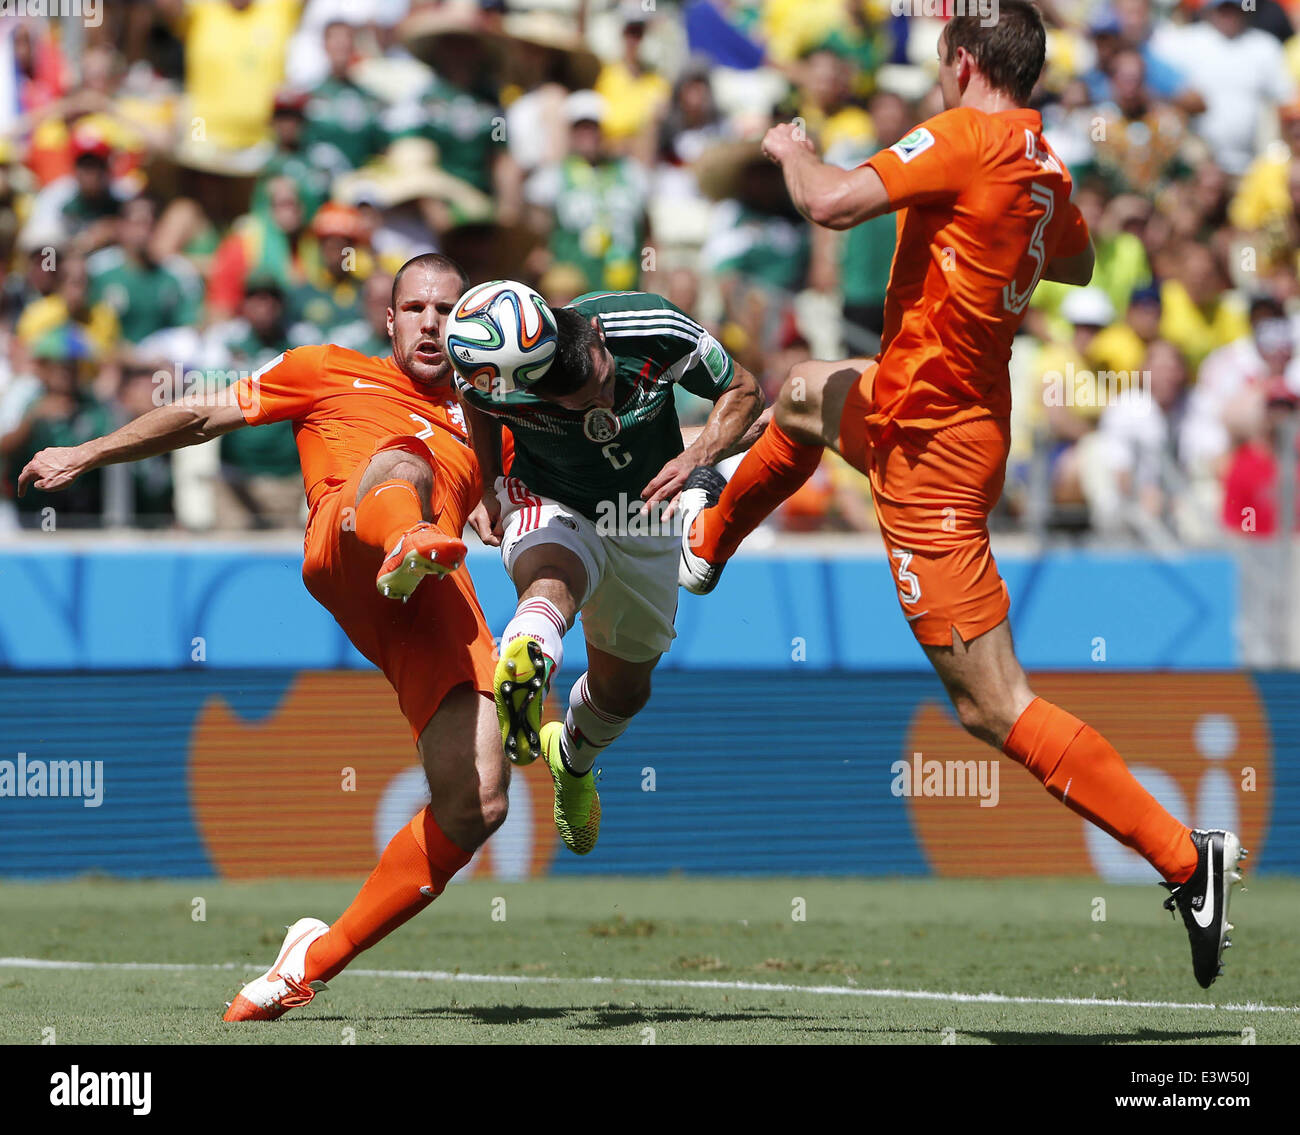 Fortaleza, Brazil. 29th June, 2014. Mexico's Hector Herrera (C) vies for the ball during a Round of 16 match between Netherlands and Mexico of 2014 FIFA World Cup at the Estadio Castelao Stadium in Fortaleza, Brazil, on June 29, 2014. Credit:  Zhou Lei/Xinhua/Alamy Live News Stock Photo